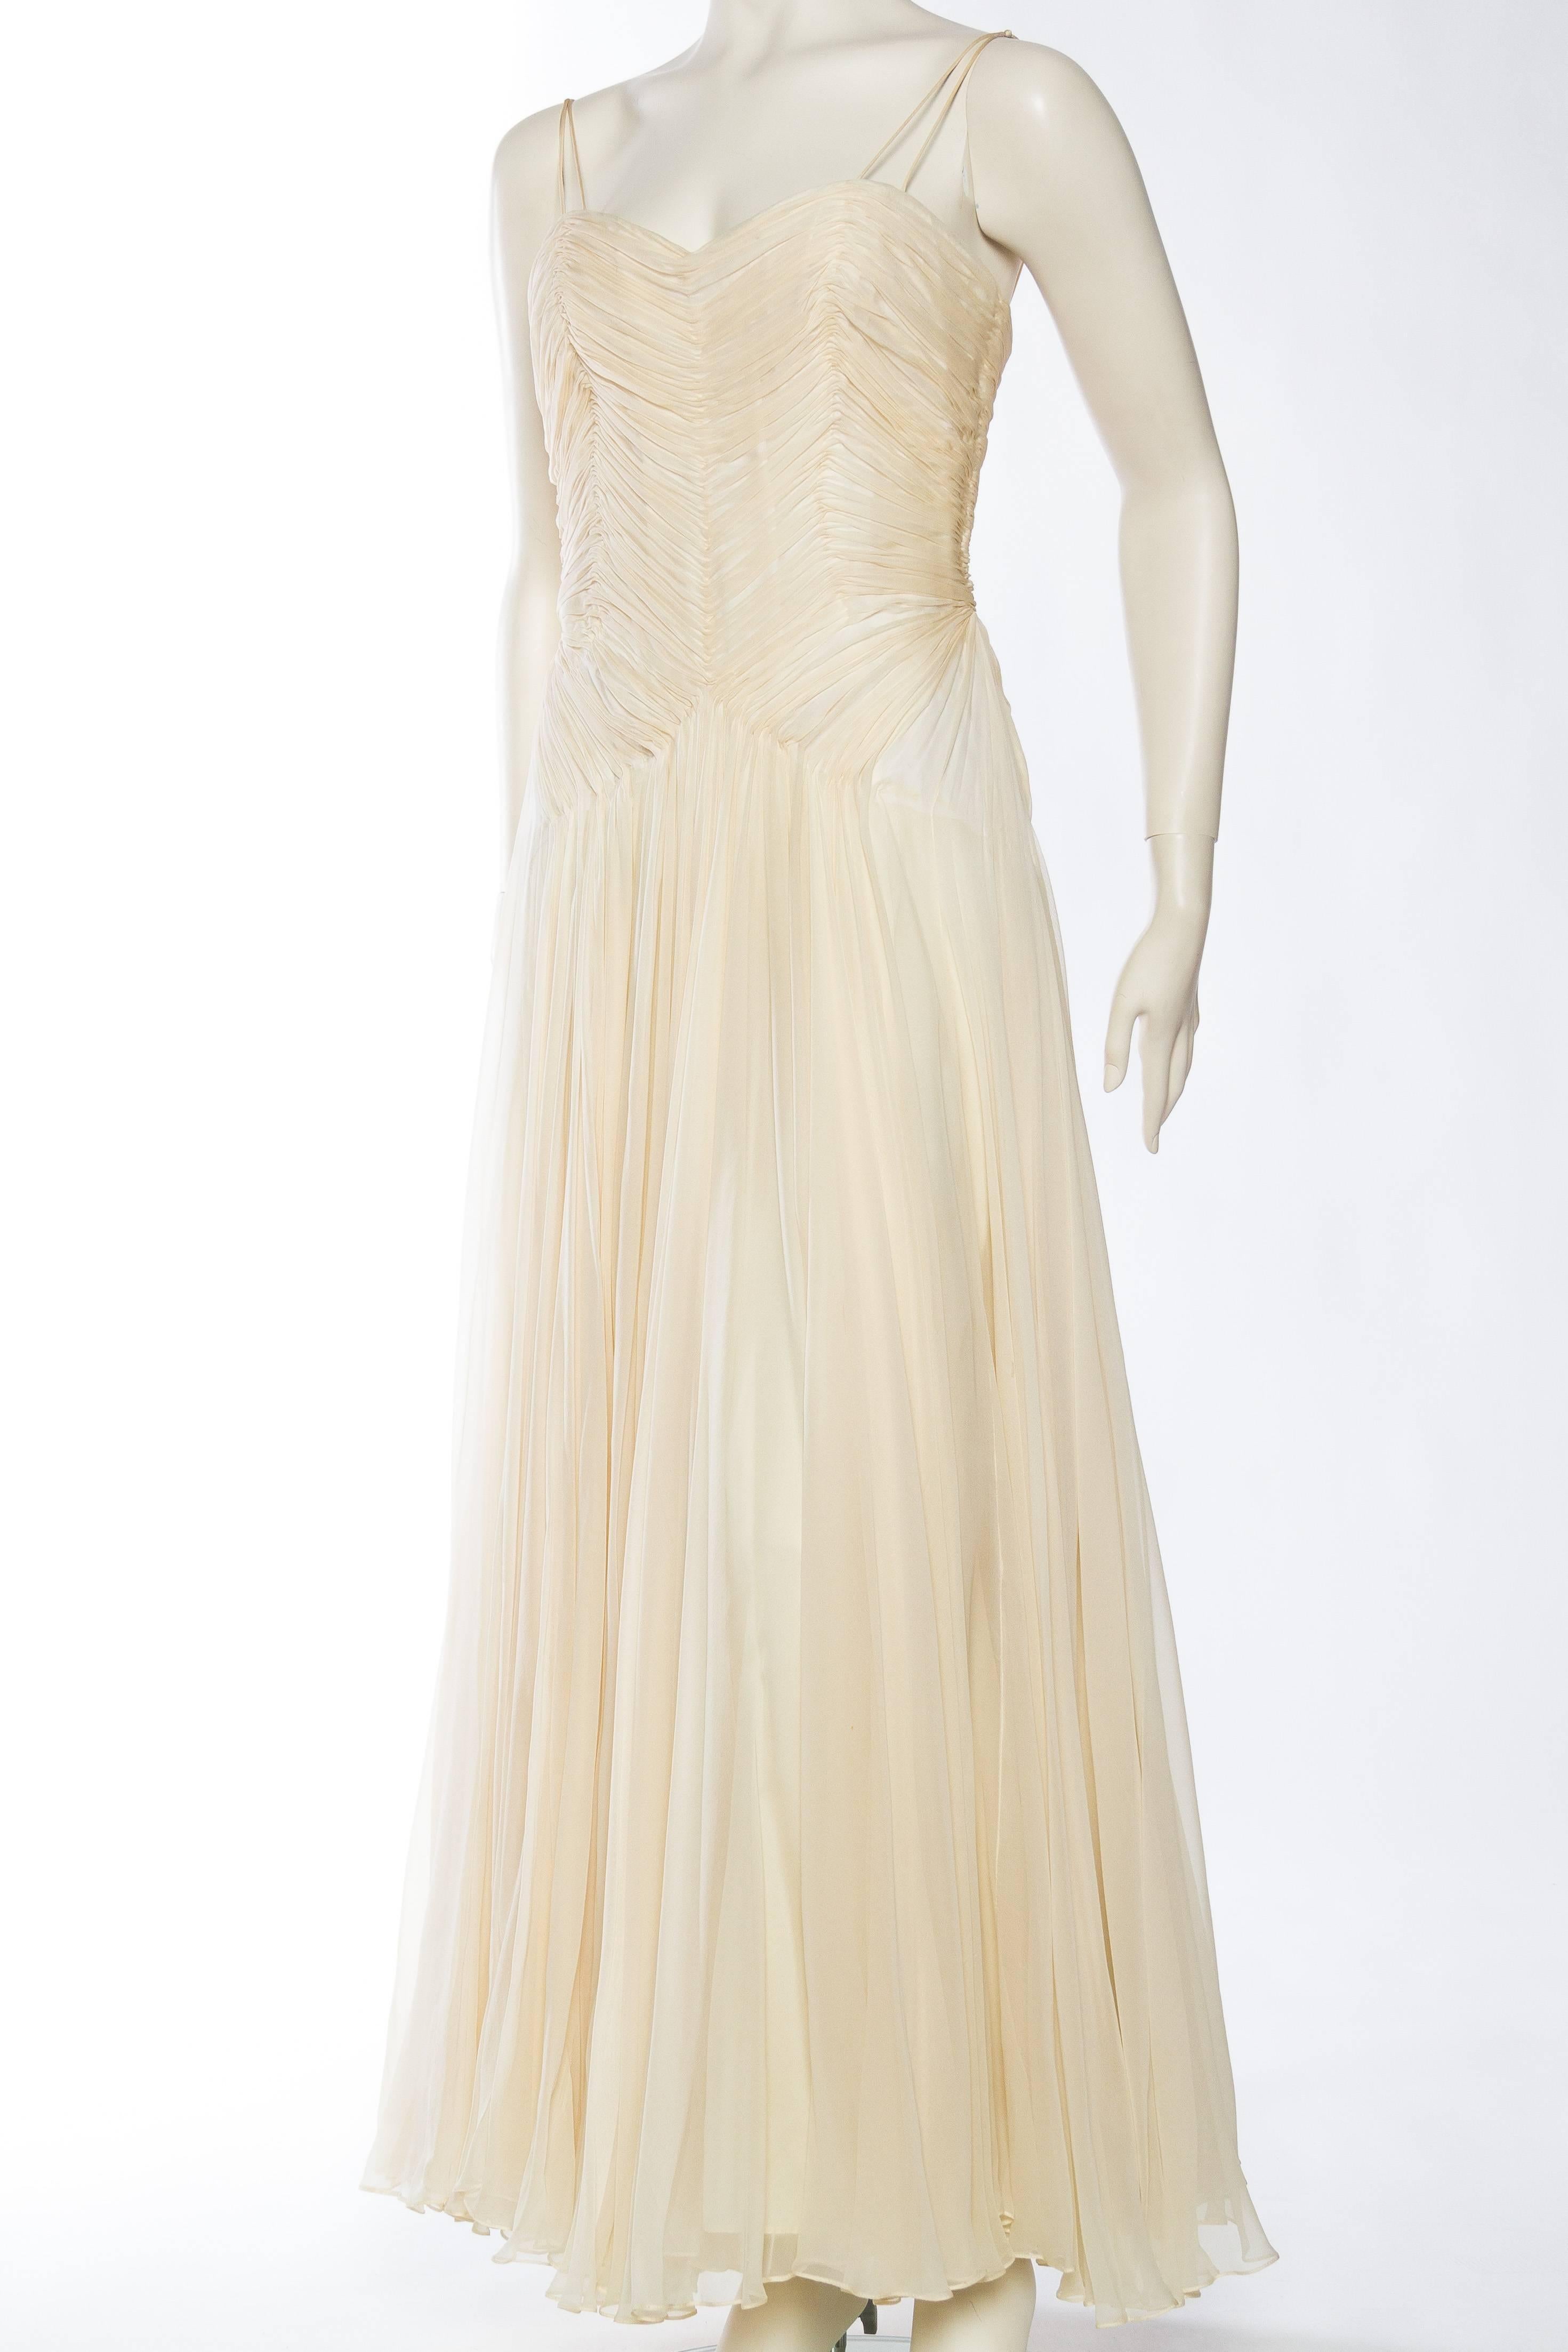 1960S RICHILENE Ivory Demi-Couture Silk Chiffon Mdm Gres Style Goddess Gown With Hand-Stitched Bodice And Miles Of Fabric